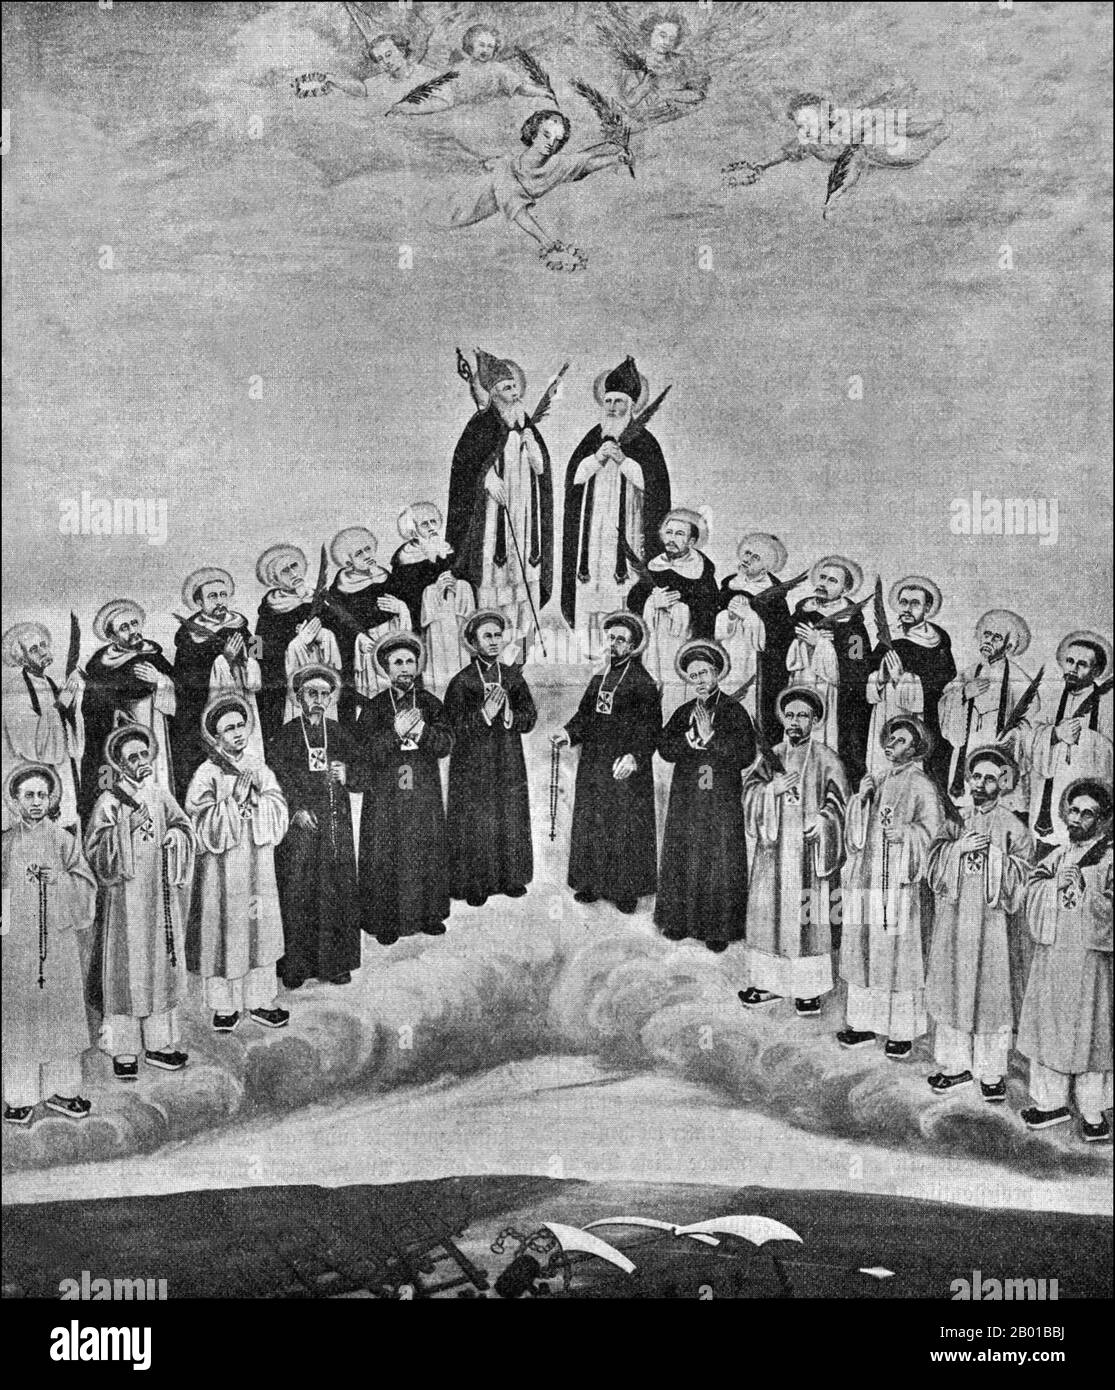 Vietnam: 26 Catholic 'martyrs' of Tonkin, beatified by the Vatican in 1900. Illustration, 1903.  The Vatican estimates the number of Vietnamese 'martyrs' at between 130,000 and 300,000. The Vietnamese Martyrs fall into several groupings, those of the Dominican and Jesuit missionary era of the 17th century, those killed in the politically inspired persecutions of the 19th century, and those martyred during the Communist purges of the 20th century. Stock Photo